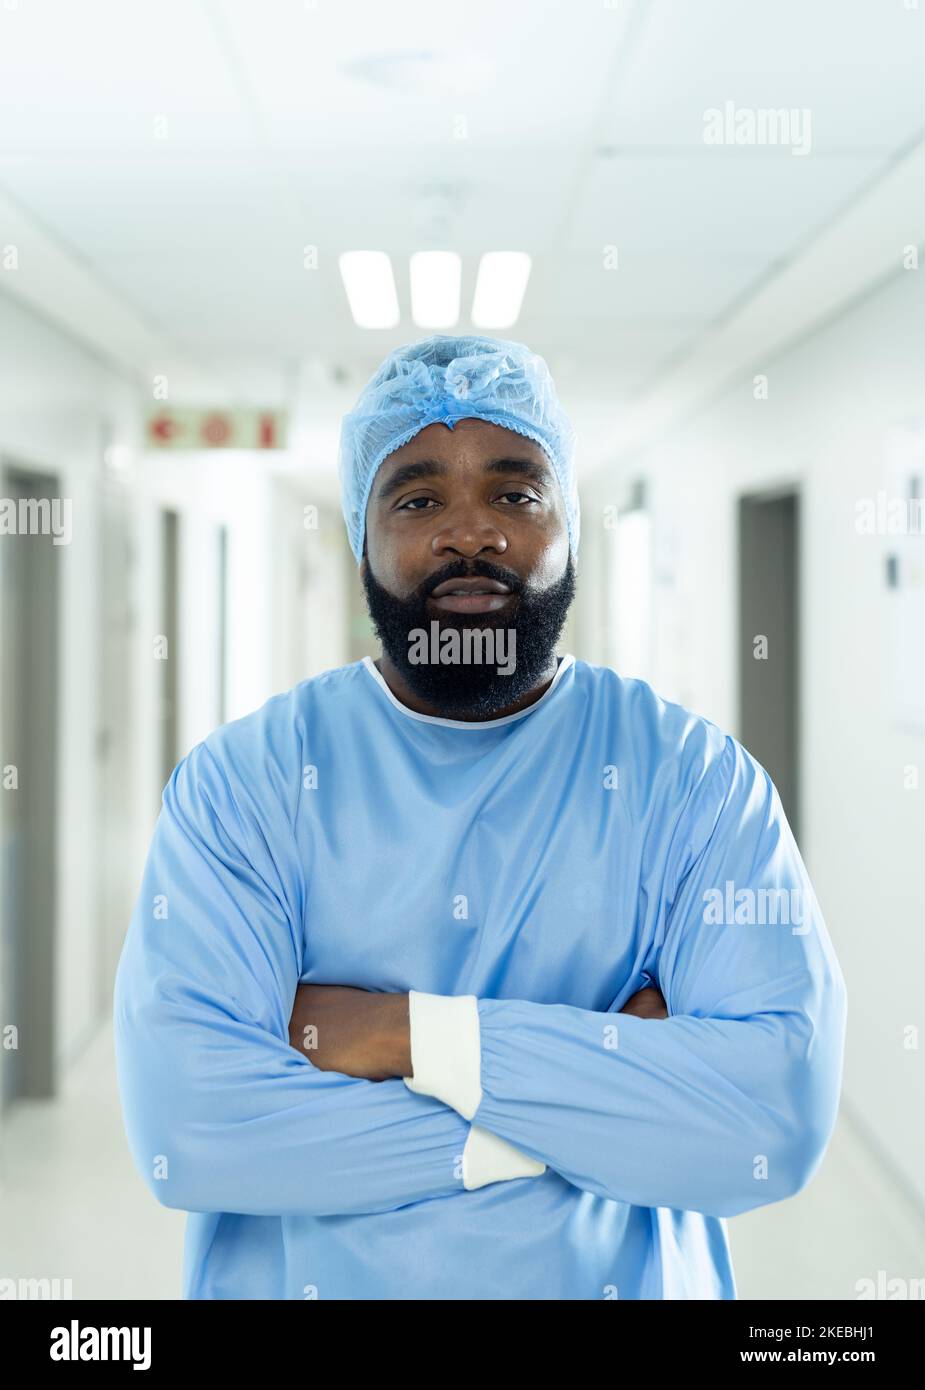 Vertical portrait of biracial male healthcare worker in surgical cap and gown in hospital corridor Stock Photo